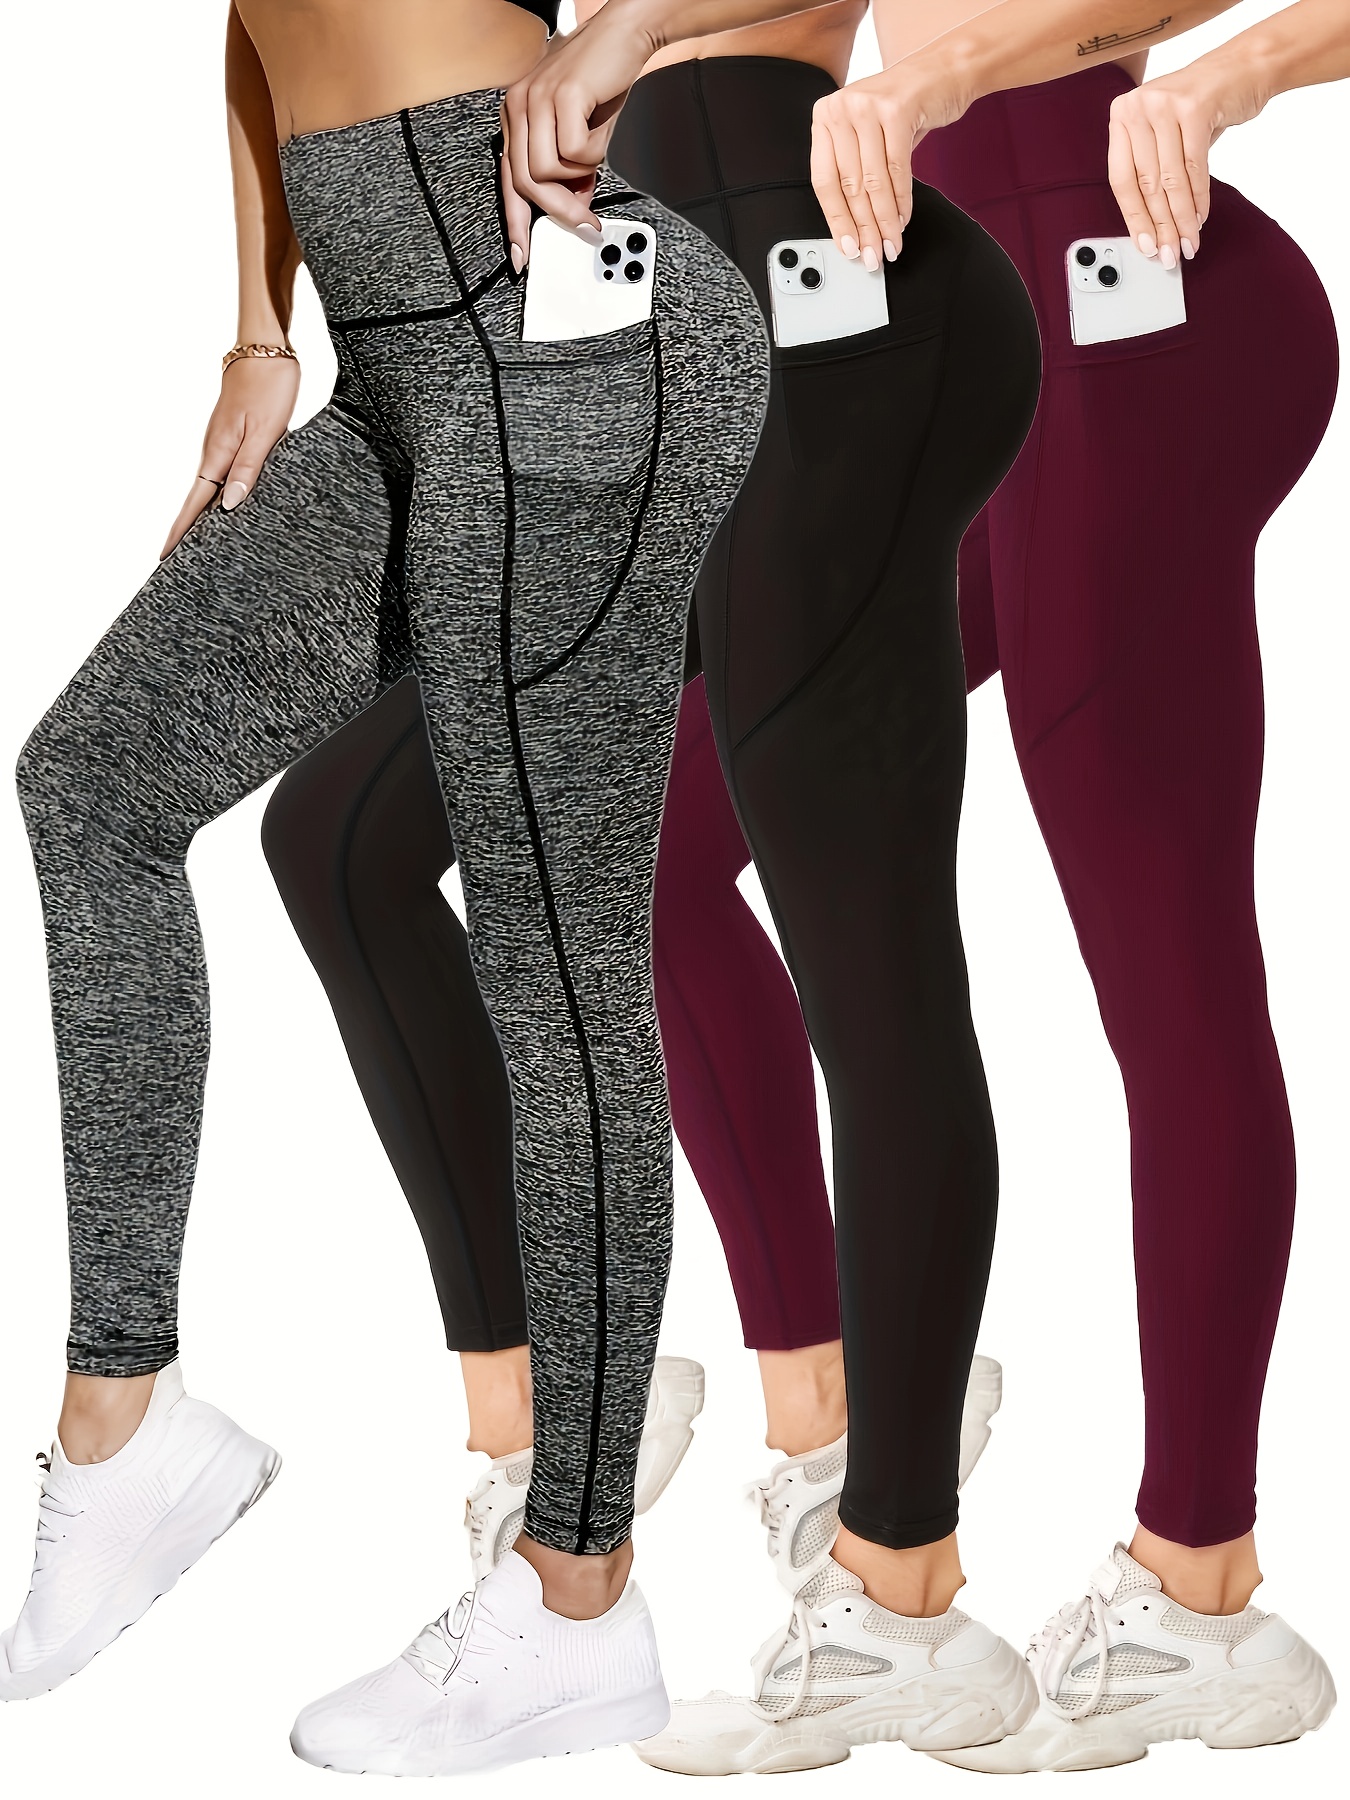 3 Pack Capri Leggings for Women with Slant Pockets - Solid Color High  Waisted Capris Yoga Pants for Workout 